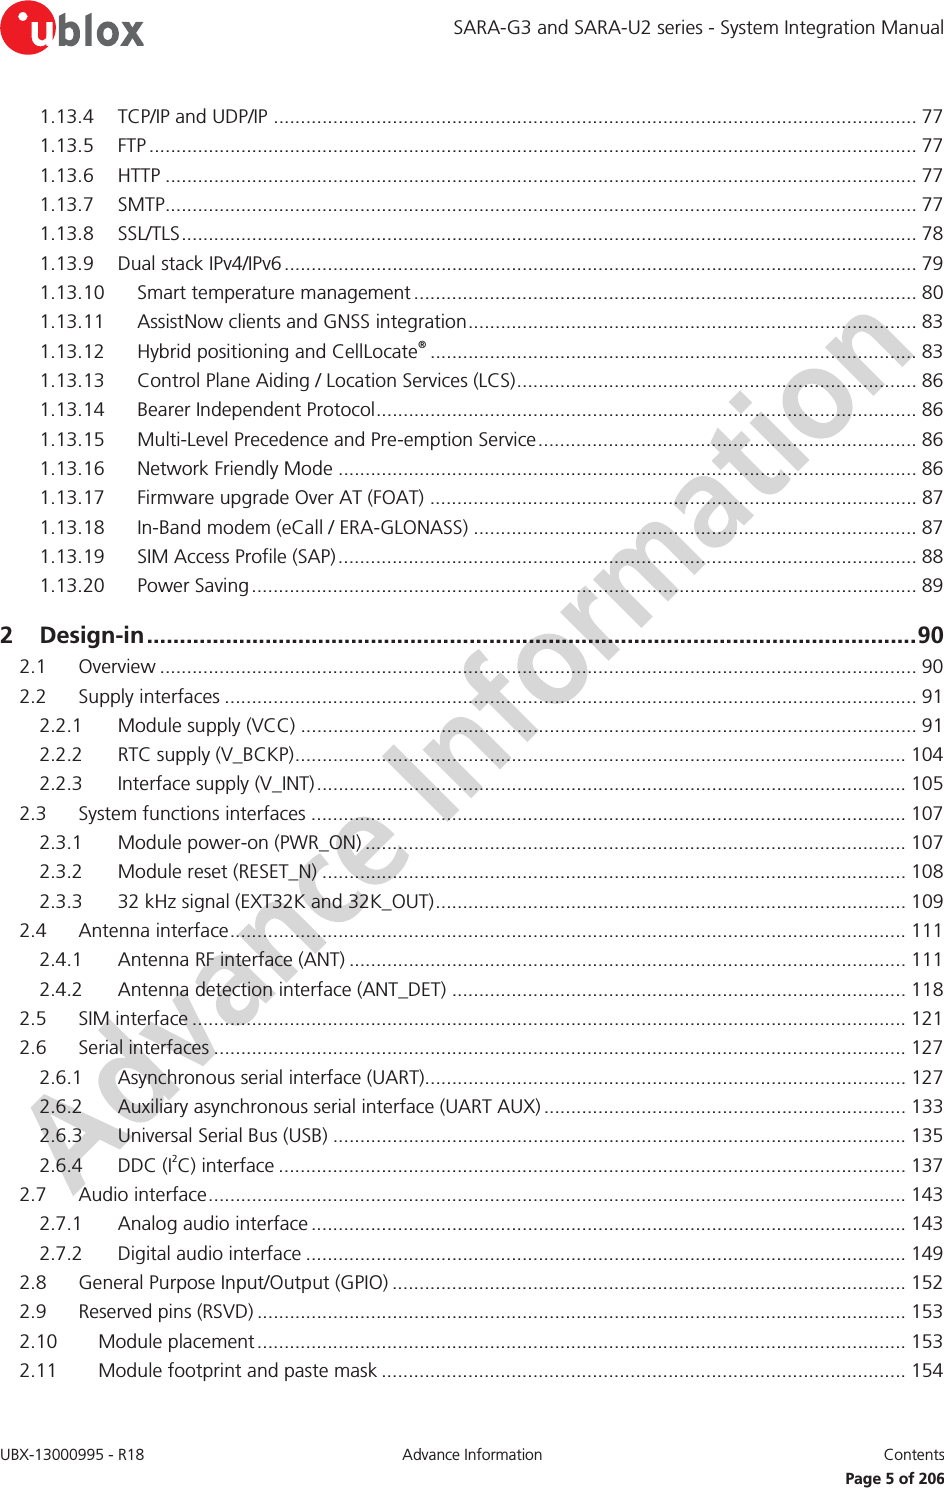 SARA-G3 and SARA-U2 series - System Integration Manual UBX-13000995 - R18  Advance Information  Contents   Page 5 of 206 1.13.4 TCP/IP and UDP/IP ....................................................................................................................... 77 1.13.5 FTP .............................................................................................................................................. 77 1.13.6 HTTP ........................................................................................................................................... 77 1.13.7 SMTP ........................................................................................................................................... 77 1.13.8 SSL/TLS ........................................................................................................................................ 78 1.13.9 Dual stack IPv4/IPv6 ..................................................................................................................... 79 1.13.10 Smart temperature management .............................................................................................  80 1.13.11 AssistNow clients and GNSS integration ................................................................................... 83 1.13.12 Hybrid positioning and CellLocate® .......................................................................................... 83 1.13.13 Control Plane Aiding / Location Services (LCS) .......................................................................... 86 1.13.14 Bearer Independent Protocol .................................................................................................... 86 1.13.15 Multi-Level Precedence and Pre-emption Service ...................................................................... 86 1.13.16 Network Friendly Mode ........................................................................................................... 86 1.13.17 Firmware upgrade Over AT (FOAT) .......................................................................................... 87 1.13.18 In-Band modem (eCall / ERA-GLONASS) .................................................................................. 87 1.13.19 SIM Access Profile (SAP) ........................................................................................................... 88 1.13.20 Power Saving ........................................................................................................................... 89 2 Design-in ..................................................................................................................... 90 2.1 Overview ............................................................................................................................................ 90 2.2 Supply interfaces ................................................................................................................................ 91 2.2.1 Module supply (VCC) .................................................................................................................. 91 2.2.2 RTC supply (V_BCKP) ................................................................................................................. 104 2.2.3 Interface supply (V_INT) ............................................................................................................. 105 2.3 System functions interfaces .............................................................................................................. 107 2.3.1 Module power-on (PWR_ON) .................................................................................................... 107 2.3.2 Module reset (RESET_N) ............................................................................................................ 108 2.3.3 32 kHz signal (EXT32K and 32K_OUT) ....................................................................................... 109 2.4 Antenna interface ............................................................................................................................. 111 2.4.1 Antenna RF interface (ANT) ....................................................................................................... 111 2.4.2 Antenna detection interface (ANT_DET) .................................................................................... 118 2.5 SIM interface .................................................................................................................................... 121 2.6 Serial interfaces ................................................................................................................................ 127 2.6.1 Asynchronous serial interface (UART)......................................................................................... 127 2.6.2 Auxiliary asynchronous serial interface (UART AUX) ................................................................... 133 2.6.3 Universal Serial Bus (USB) .......................................................................................................... 135 2.6.4 DDC (I2C) interface .................................................................................................................... 137 2.7 Audio interface ................................................................................................................................. 143 2.7.1 Analog audio interface .............................................................................................................. 143 2.7.2 Digital audio interface ............................................................................................................... 149 2.8 General Purpose Input/Output (GPIO) ............................................................................................... 152 2.9 Reserved pins (RSVD) ........................................................................................................................ 153 2.10 Module placement ........................................................................................................................ 153 2.11 Module footprint and paste mask ................................................................................................. 154 